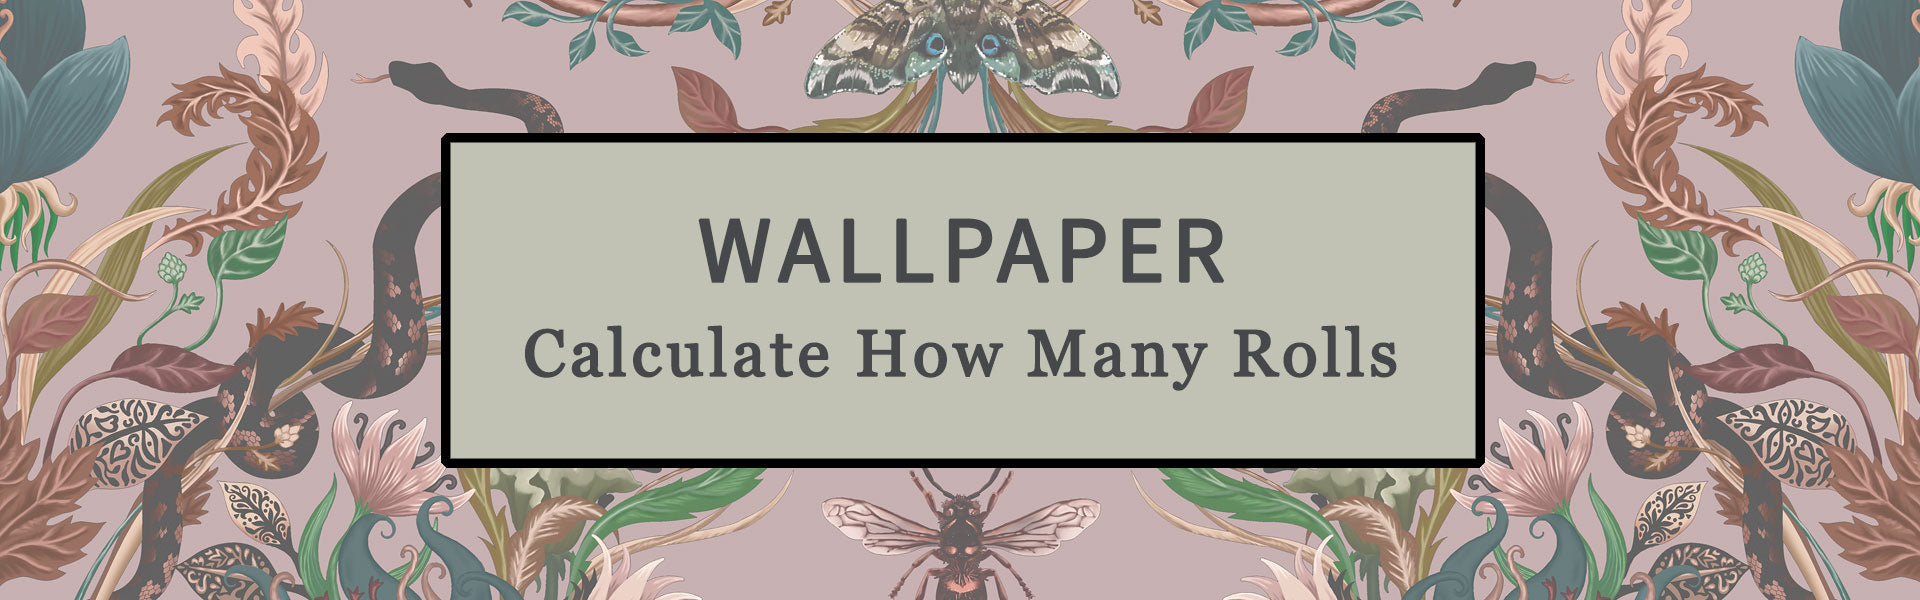 Calculate How Many Rolls of Wallpaper Needed